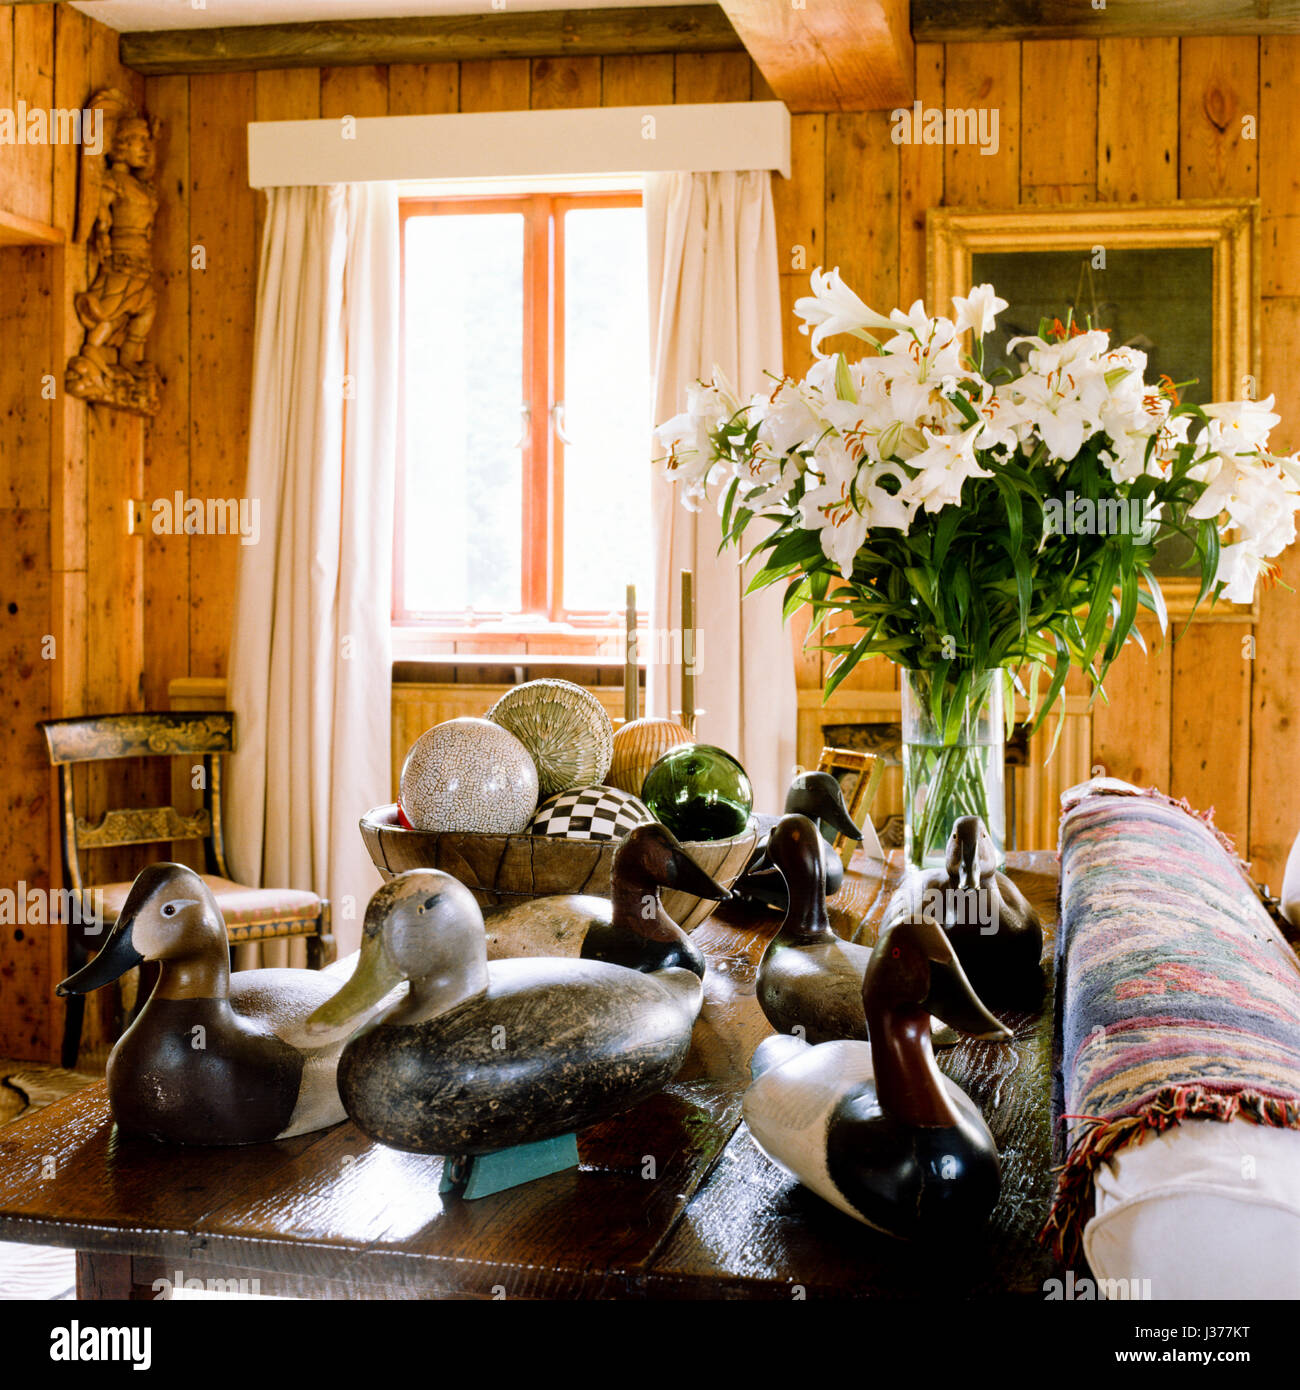 Collection of duck ornaments on table in rustic living room. Stock Photo